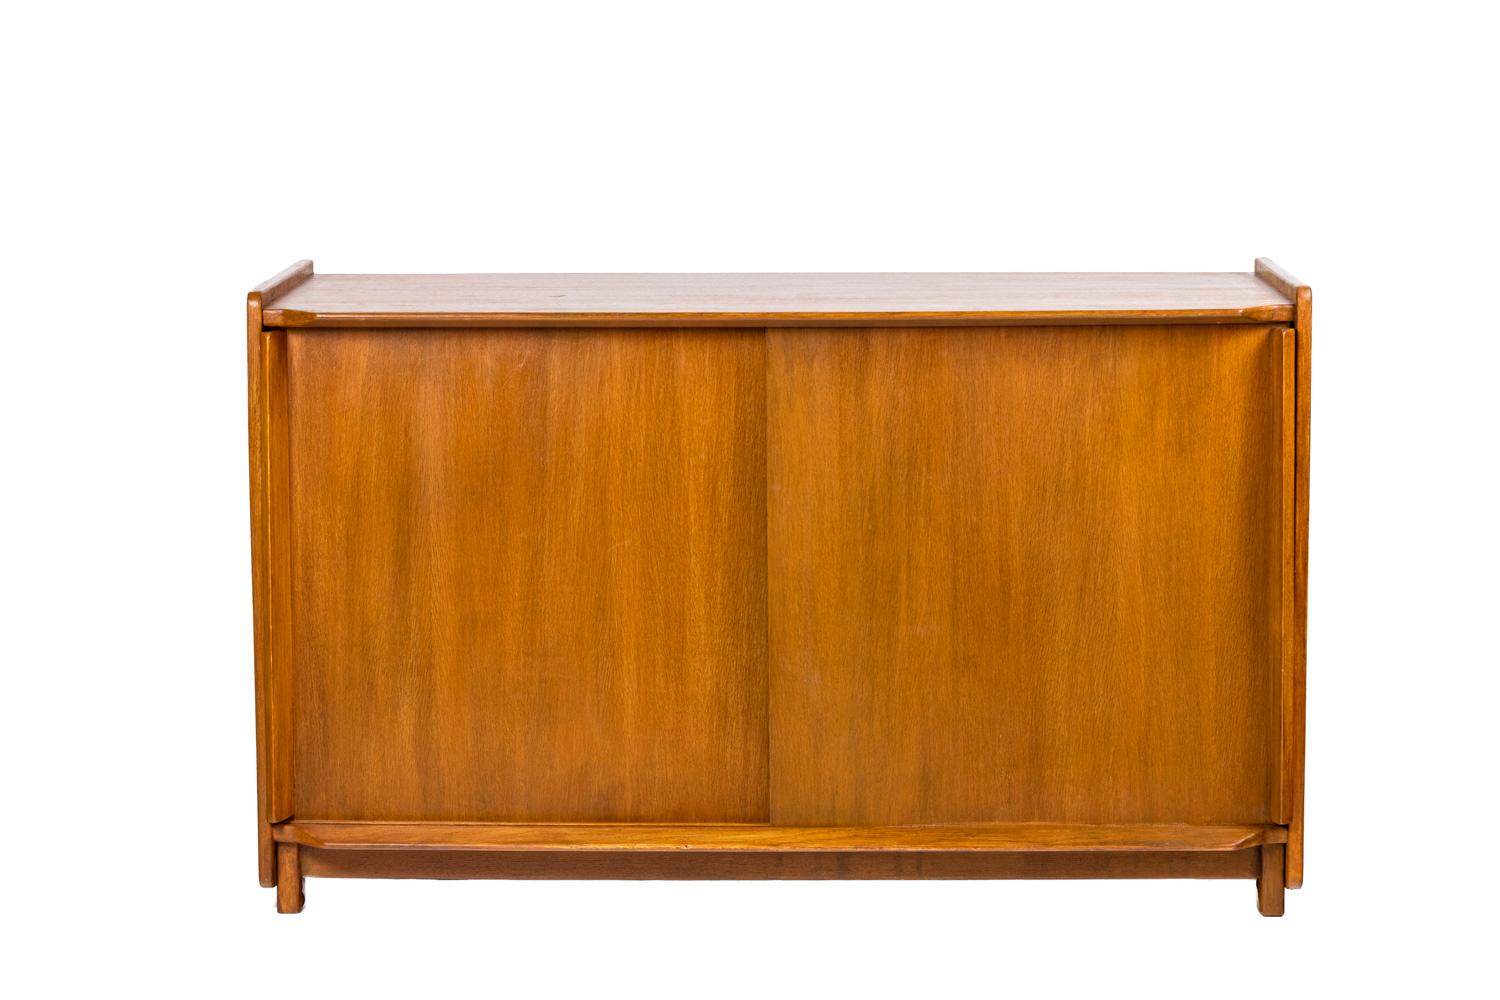 Roger Landault, attributed to. 

Sideboard in oak opening on the front with two sliding doors. A shelf inside. Rectangular and bevelled handles.

French work realized in the 1950s.

Dimensions : H 76 x W 125 x D 45 cm.